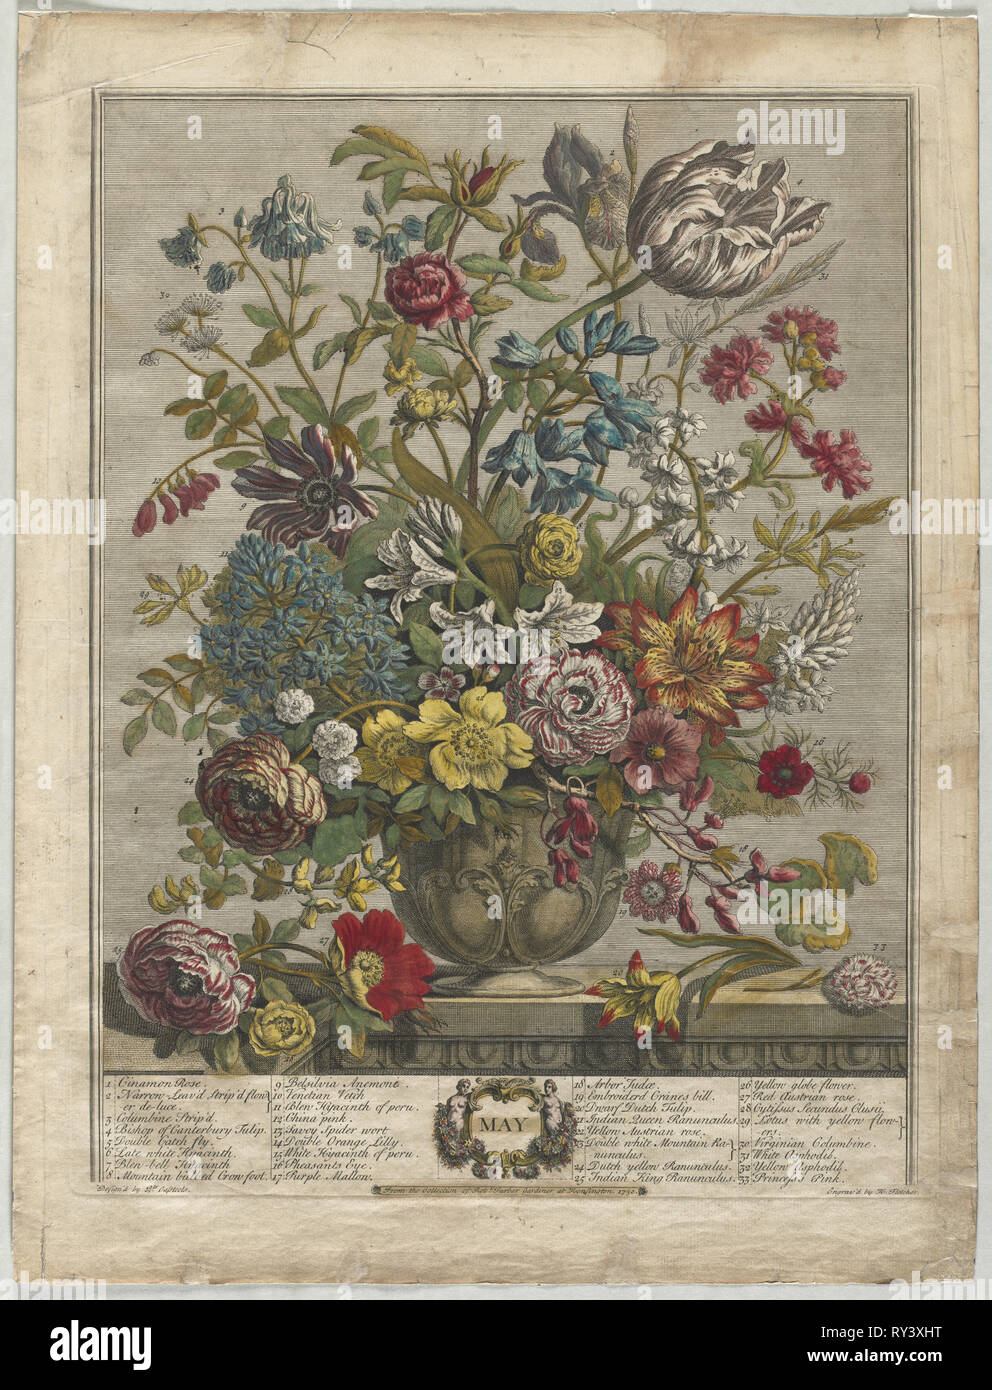 Twelve Months of Flowers:  May, 1730. Henry Fletcher (British, active 1715-38). Engraving, hand-colored; sheet: 46.6 x 35.2 cm (18 3/8 x 13 7/8 in.); platemark: 40.9 x 31.8 cm (16 1/8 x 12 1/2 in Stock Photo